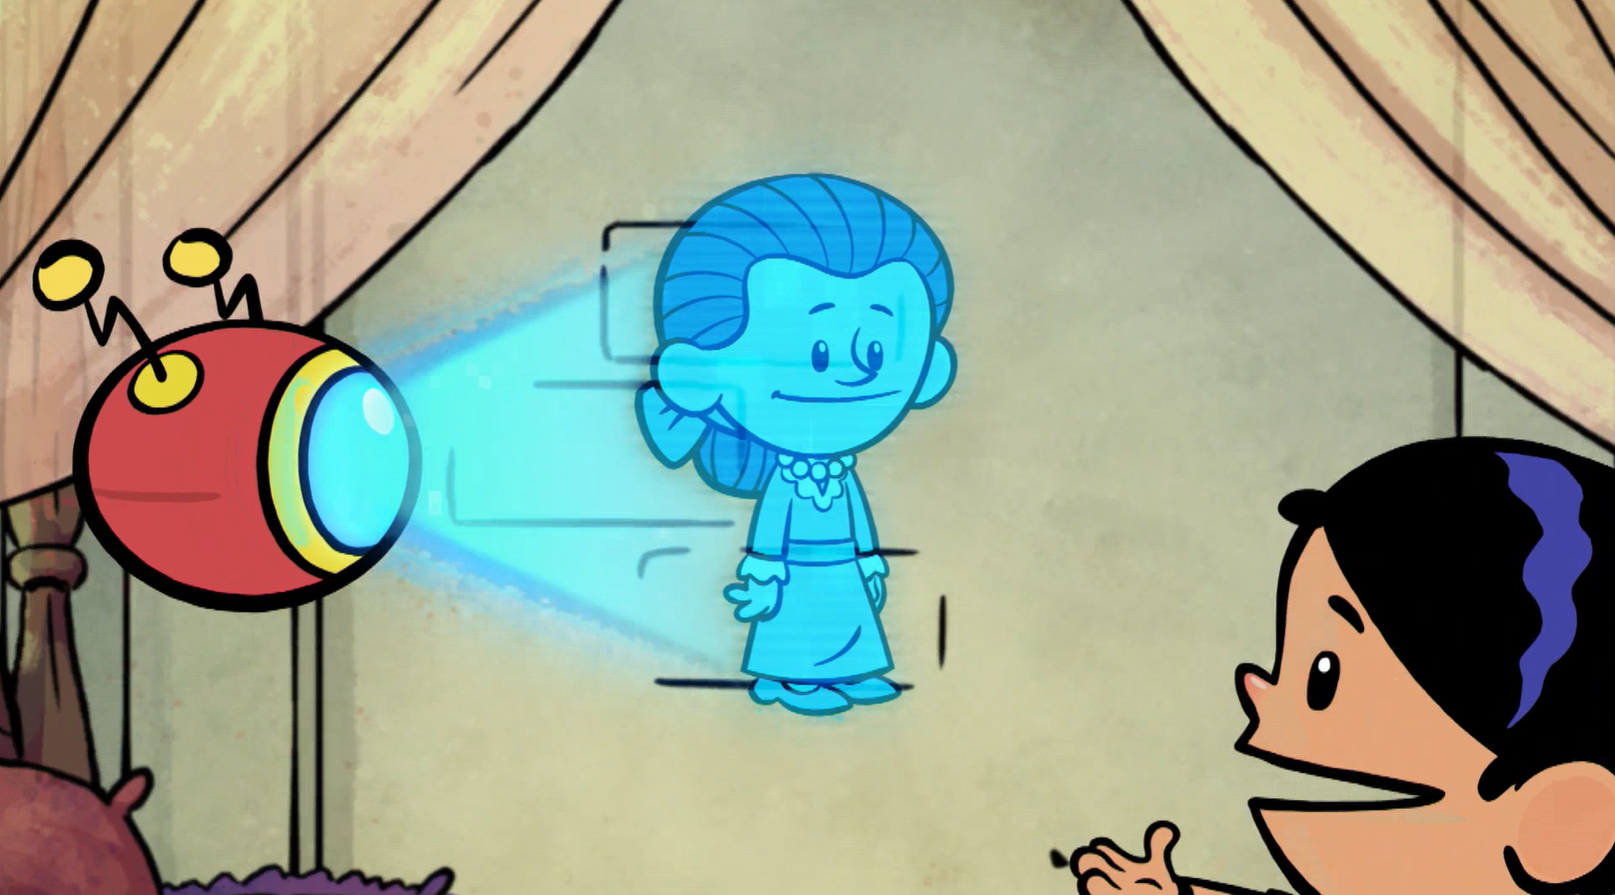 A cartoon girl talking to a hologram of a woman